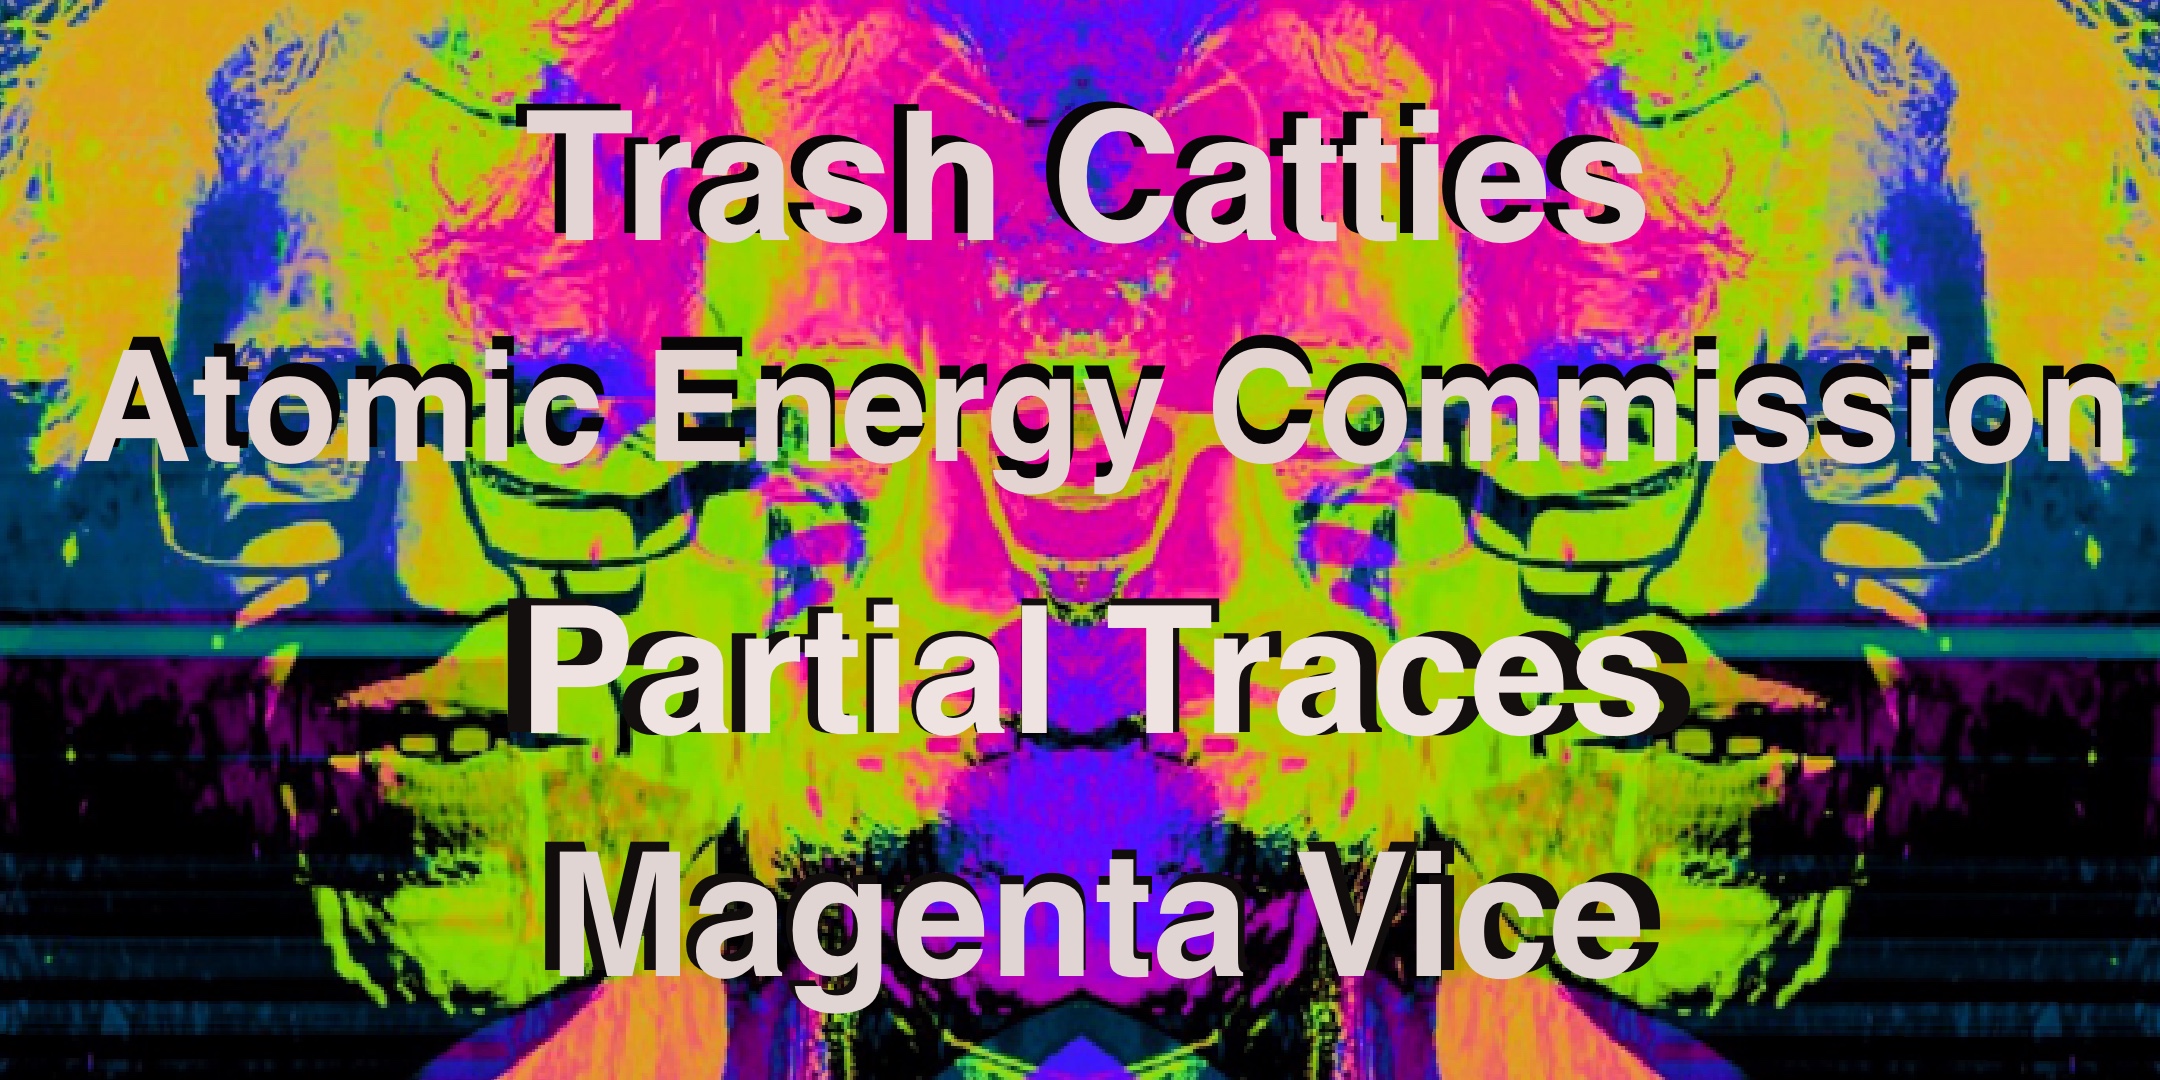 An Evening of Duos featuring Atomic Energy Commission with guests Partial Traces, Trash Catties, and Magenta Vice Thursday, February 9 The Mission Room at The Hook and Ladder Theater Doors 7:30pm :: Music 8:00pm :: 21+ $10 ADV / $15 DOS